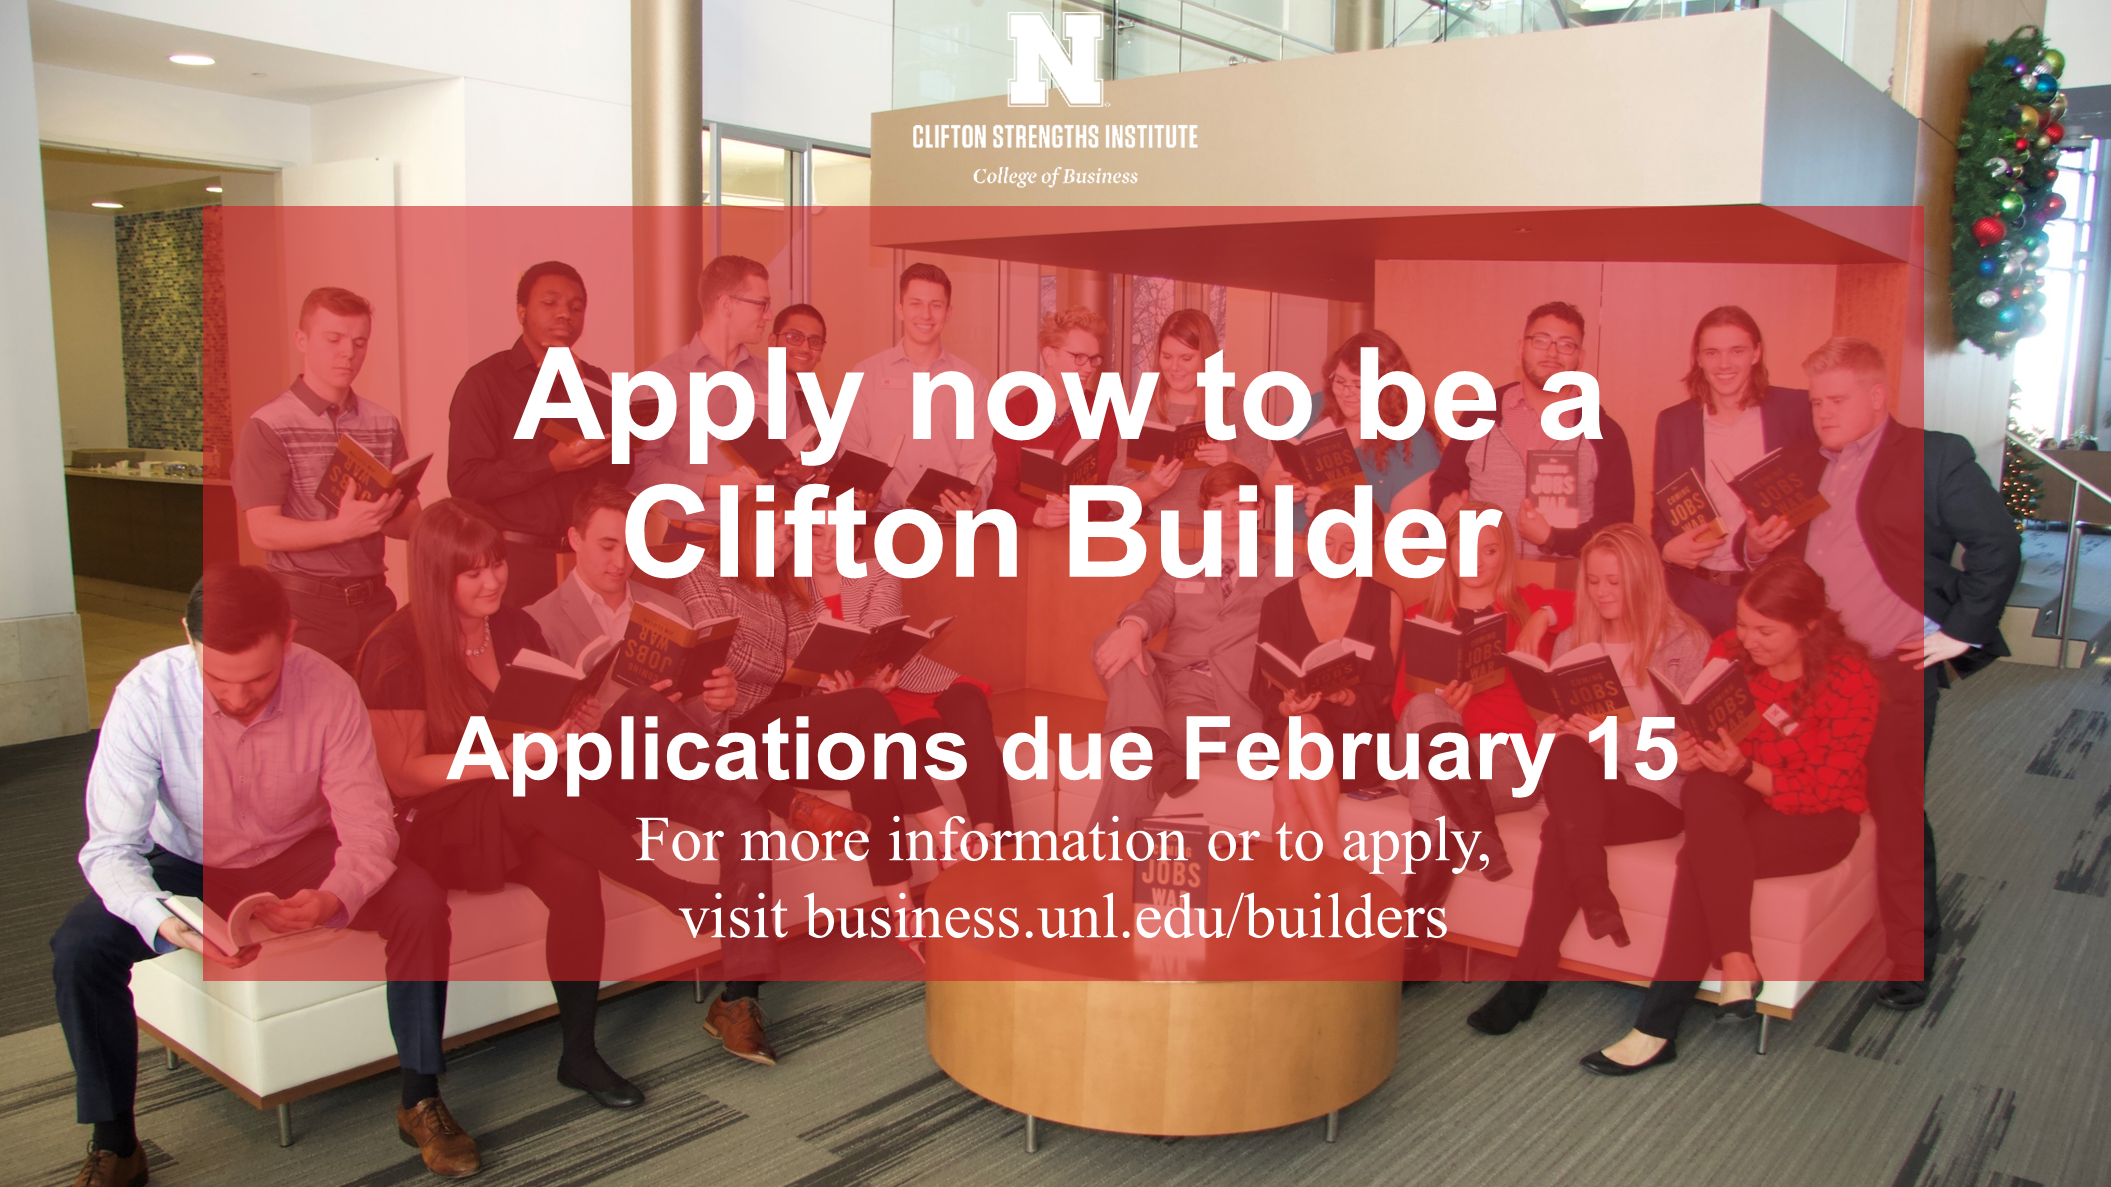 Entrepreneurial-Minded Freshmen Encouraged to Apply to Become a Clifton Builder